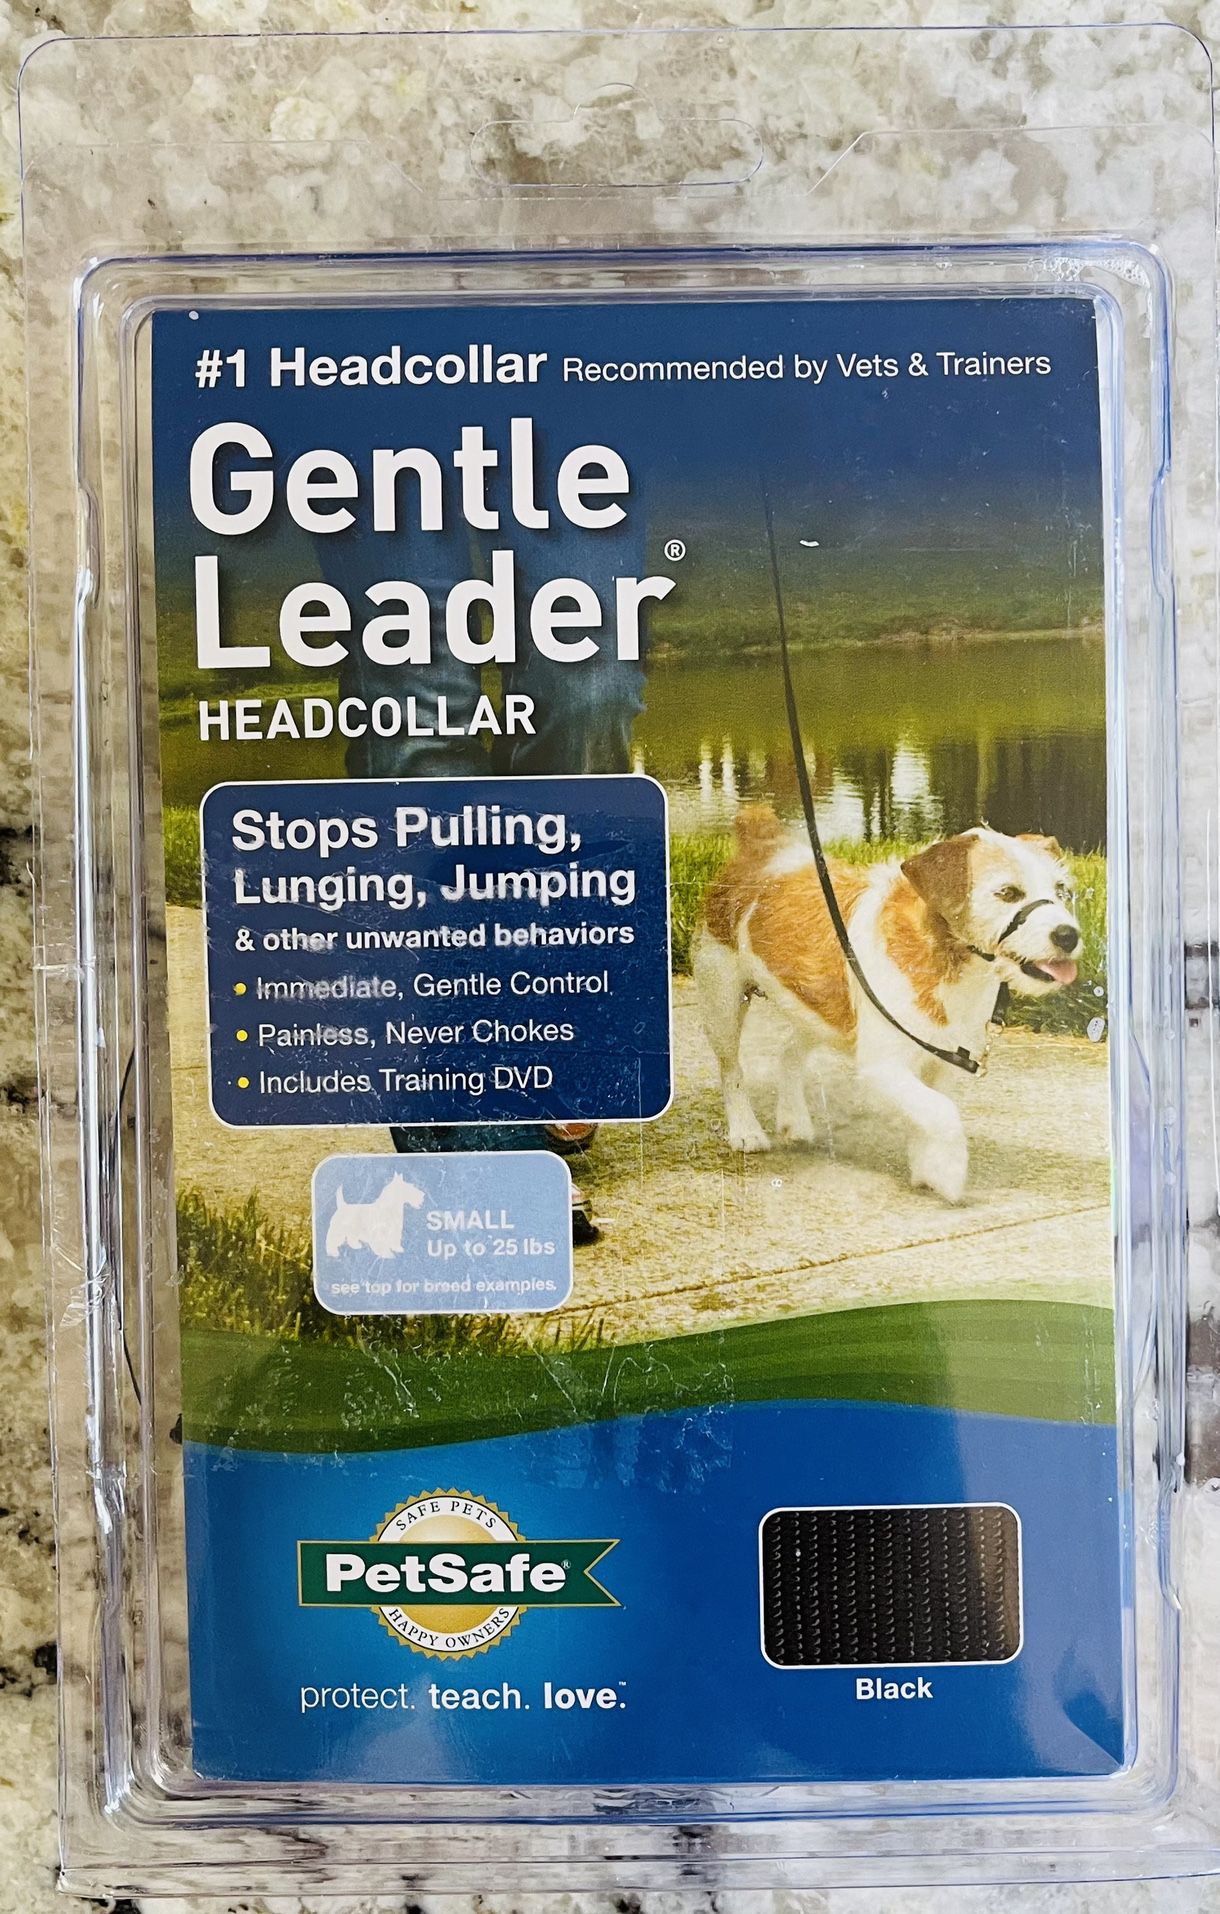 PetSafe Gentle Leader Pet Headcollar for Small Dogs - Up To 25 Lbs ( No More Pulling)